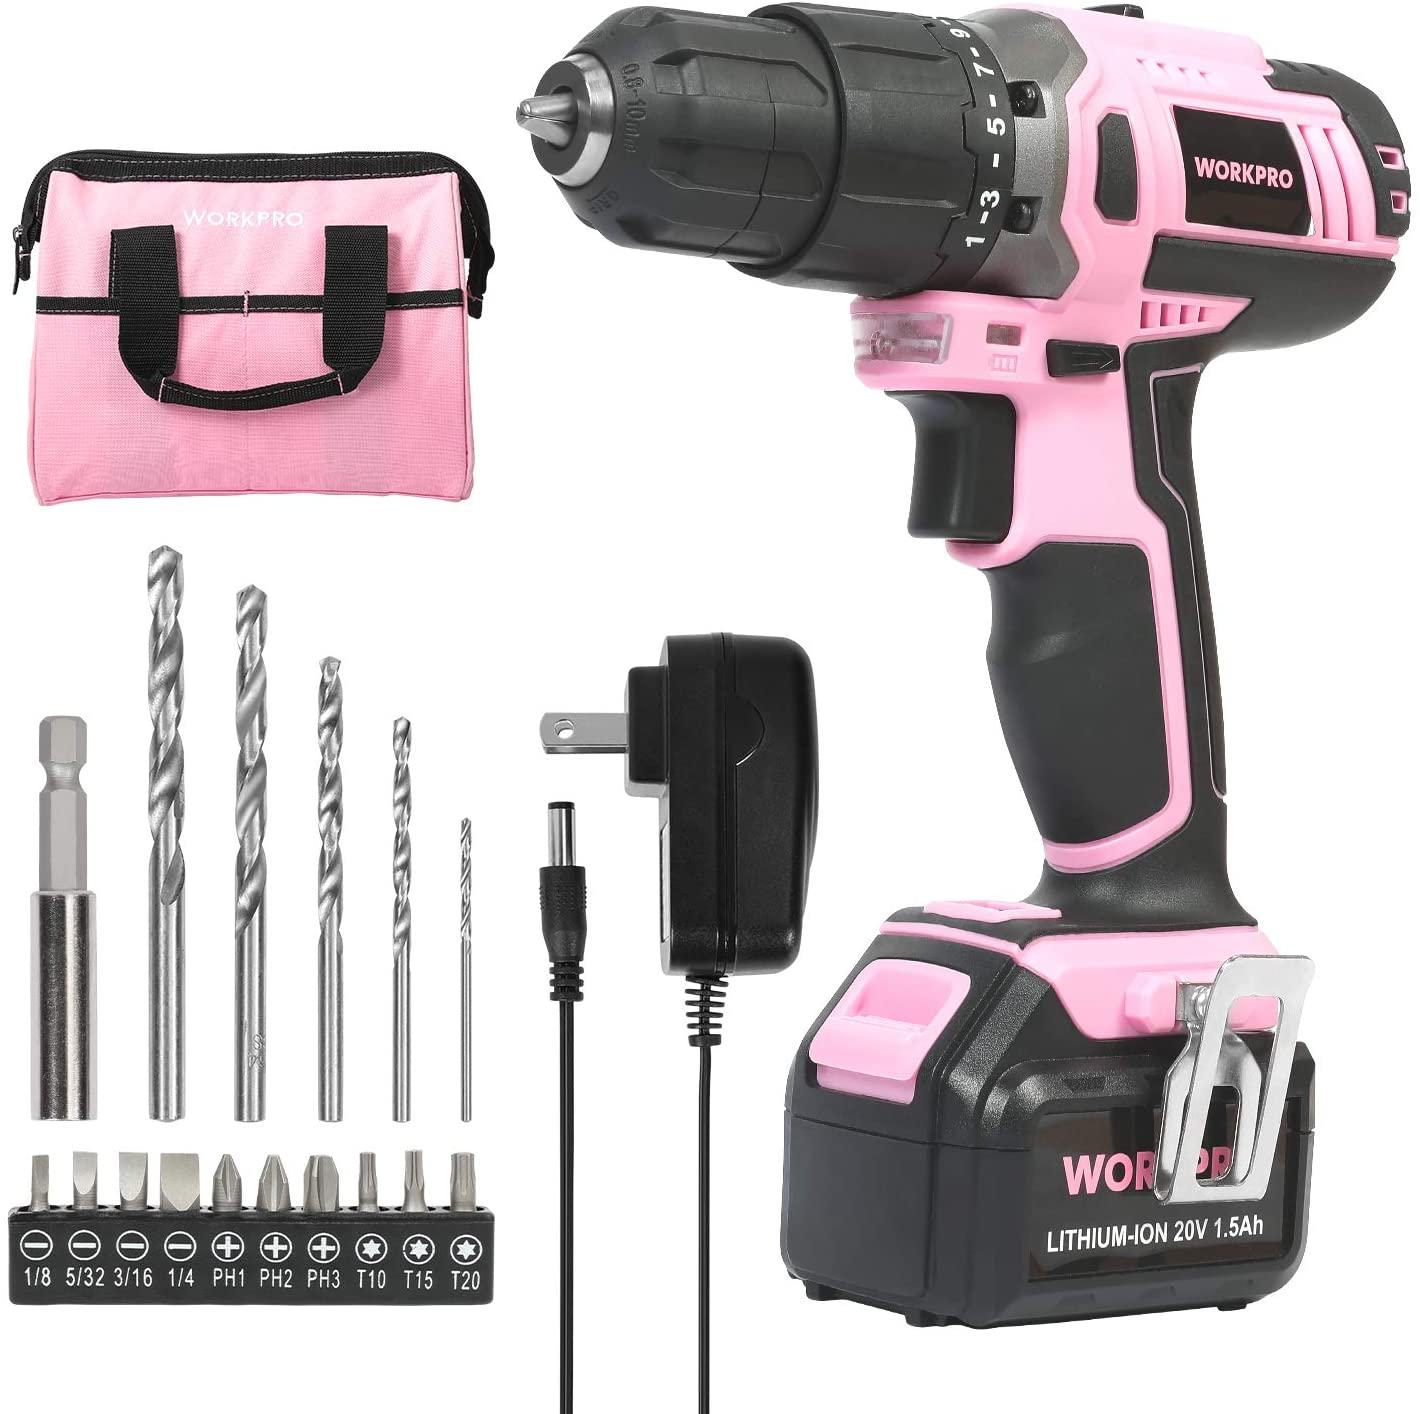 Workpro Pink Cordless 20V Lithium-ion Drill Driver for $55.99 Shipped